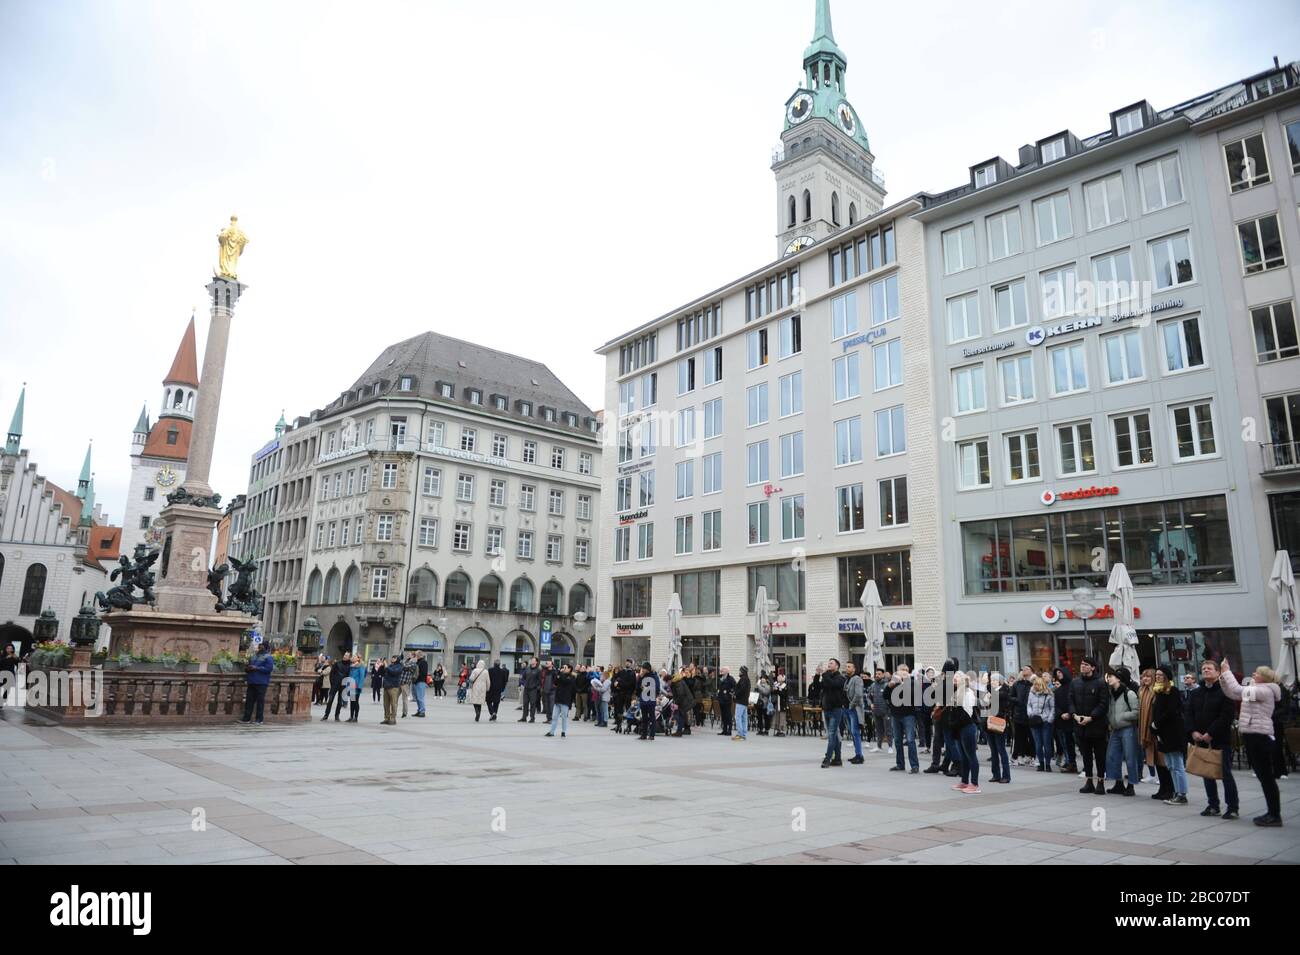 Effects of the corona virus: on Munich's Marienplatz in front of the city hall there are significantly fewer people than usual. [automated translation] Stock Photo